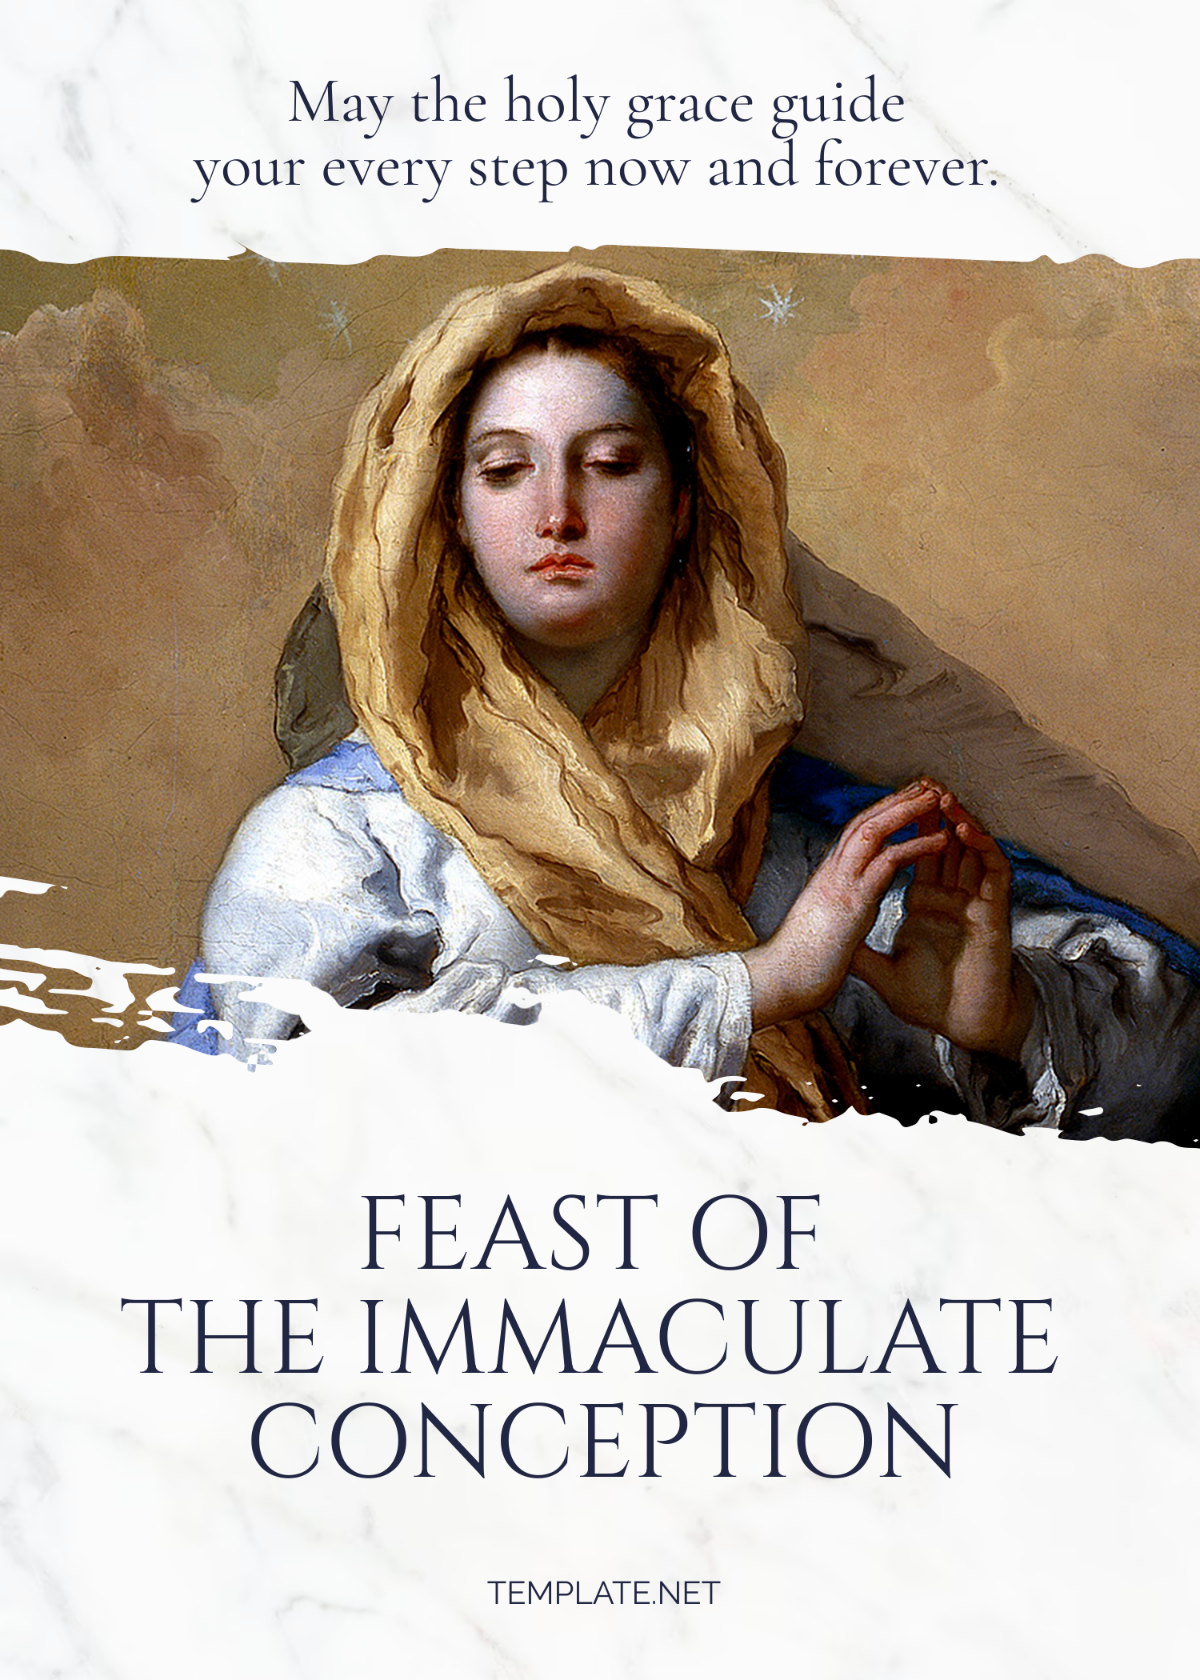 Feast of the Immaculate Conception Greeting